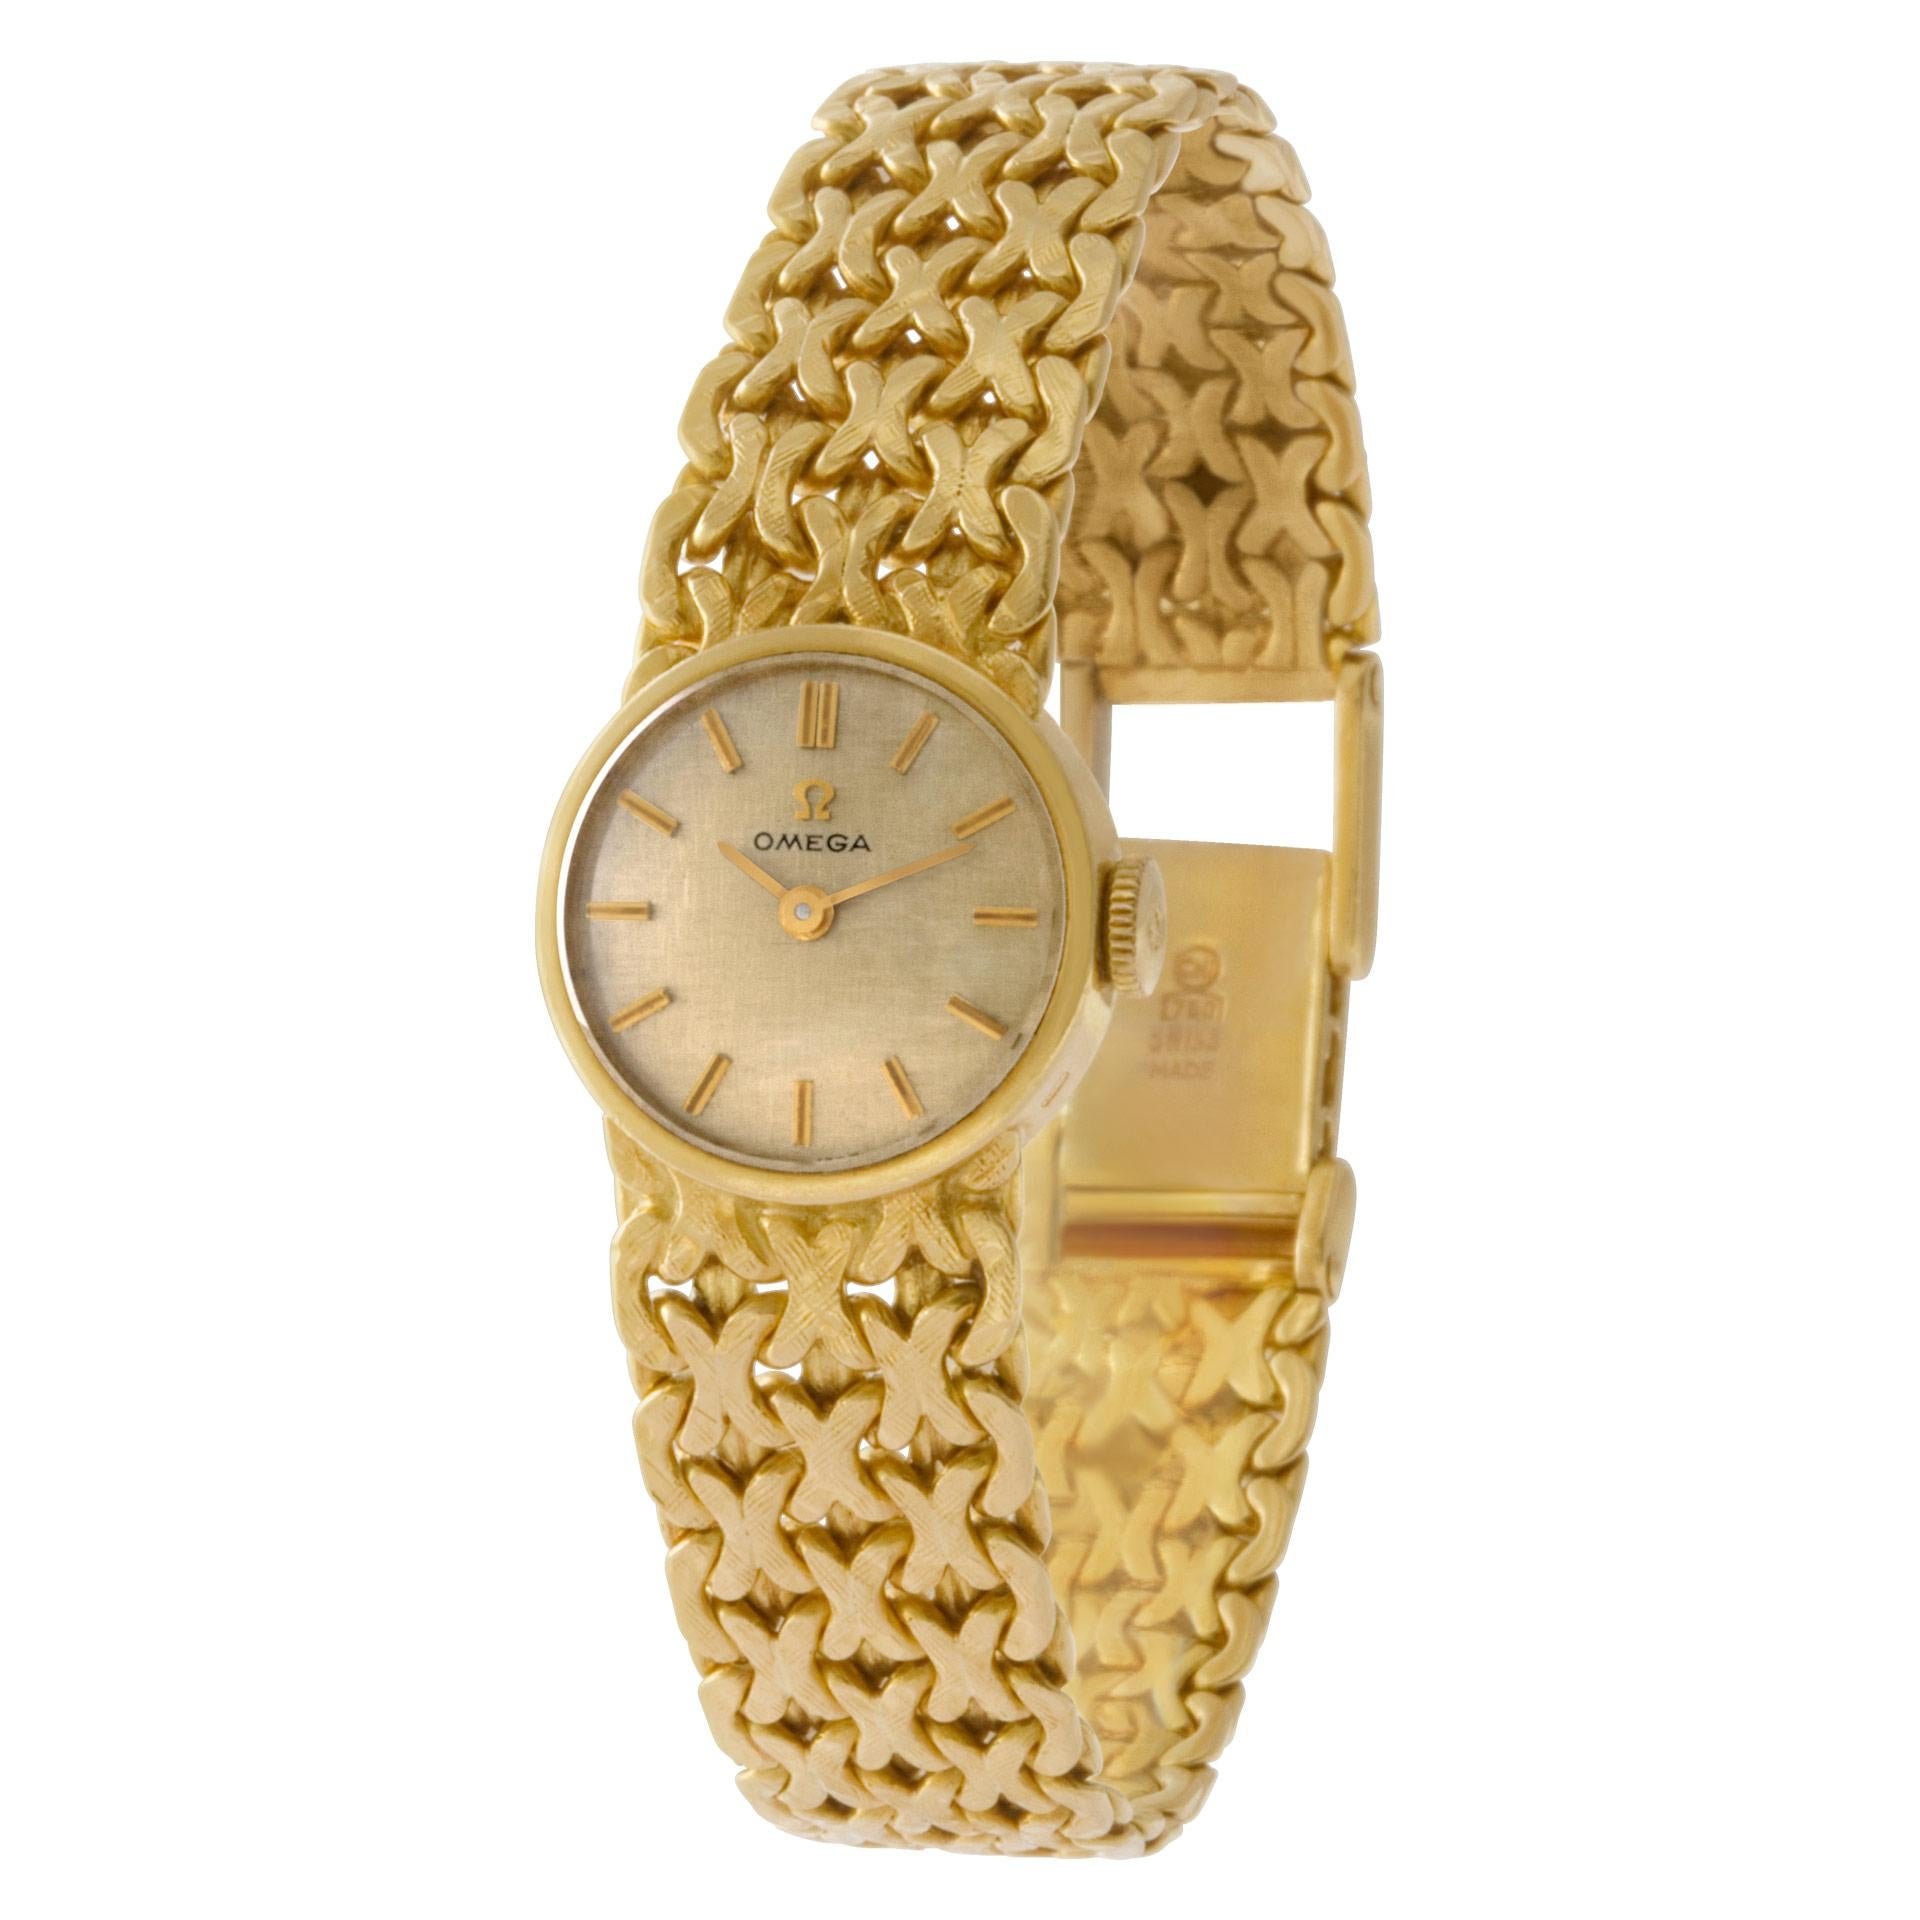 Omega in 18k on a woven band. Quartz. 17 mm case size. Ref 7173. Circa 1980's Fine Pre-owned Omega Watch.   Certified preowned Vintage Omega Vintage 7173 watch is made out of yellow gold on a 18k bracelet with a 18k Clasp buckle. This Omega watch